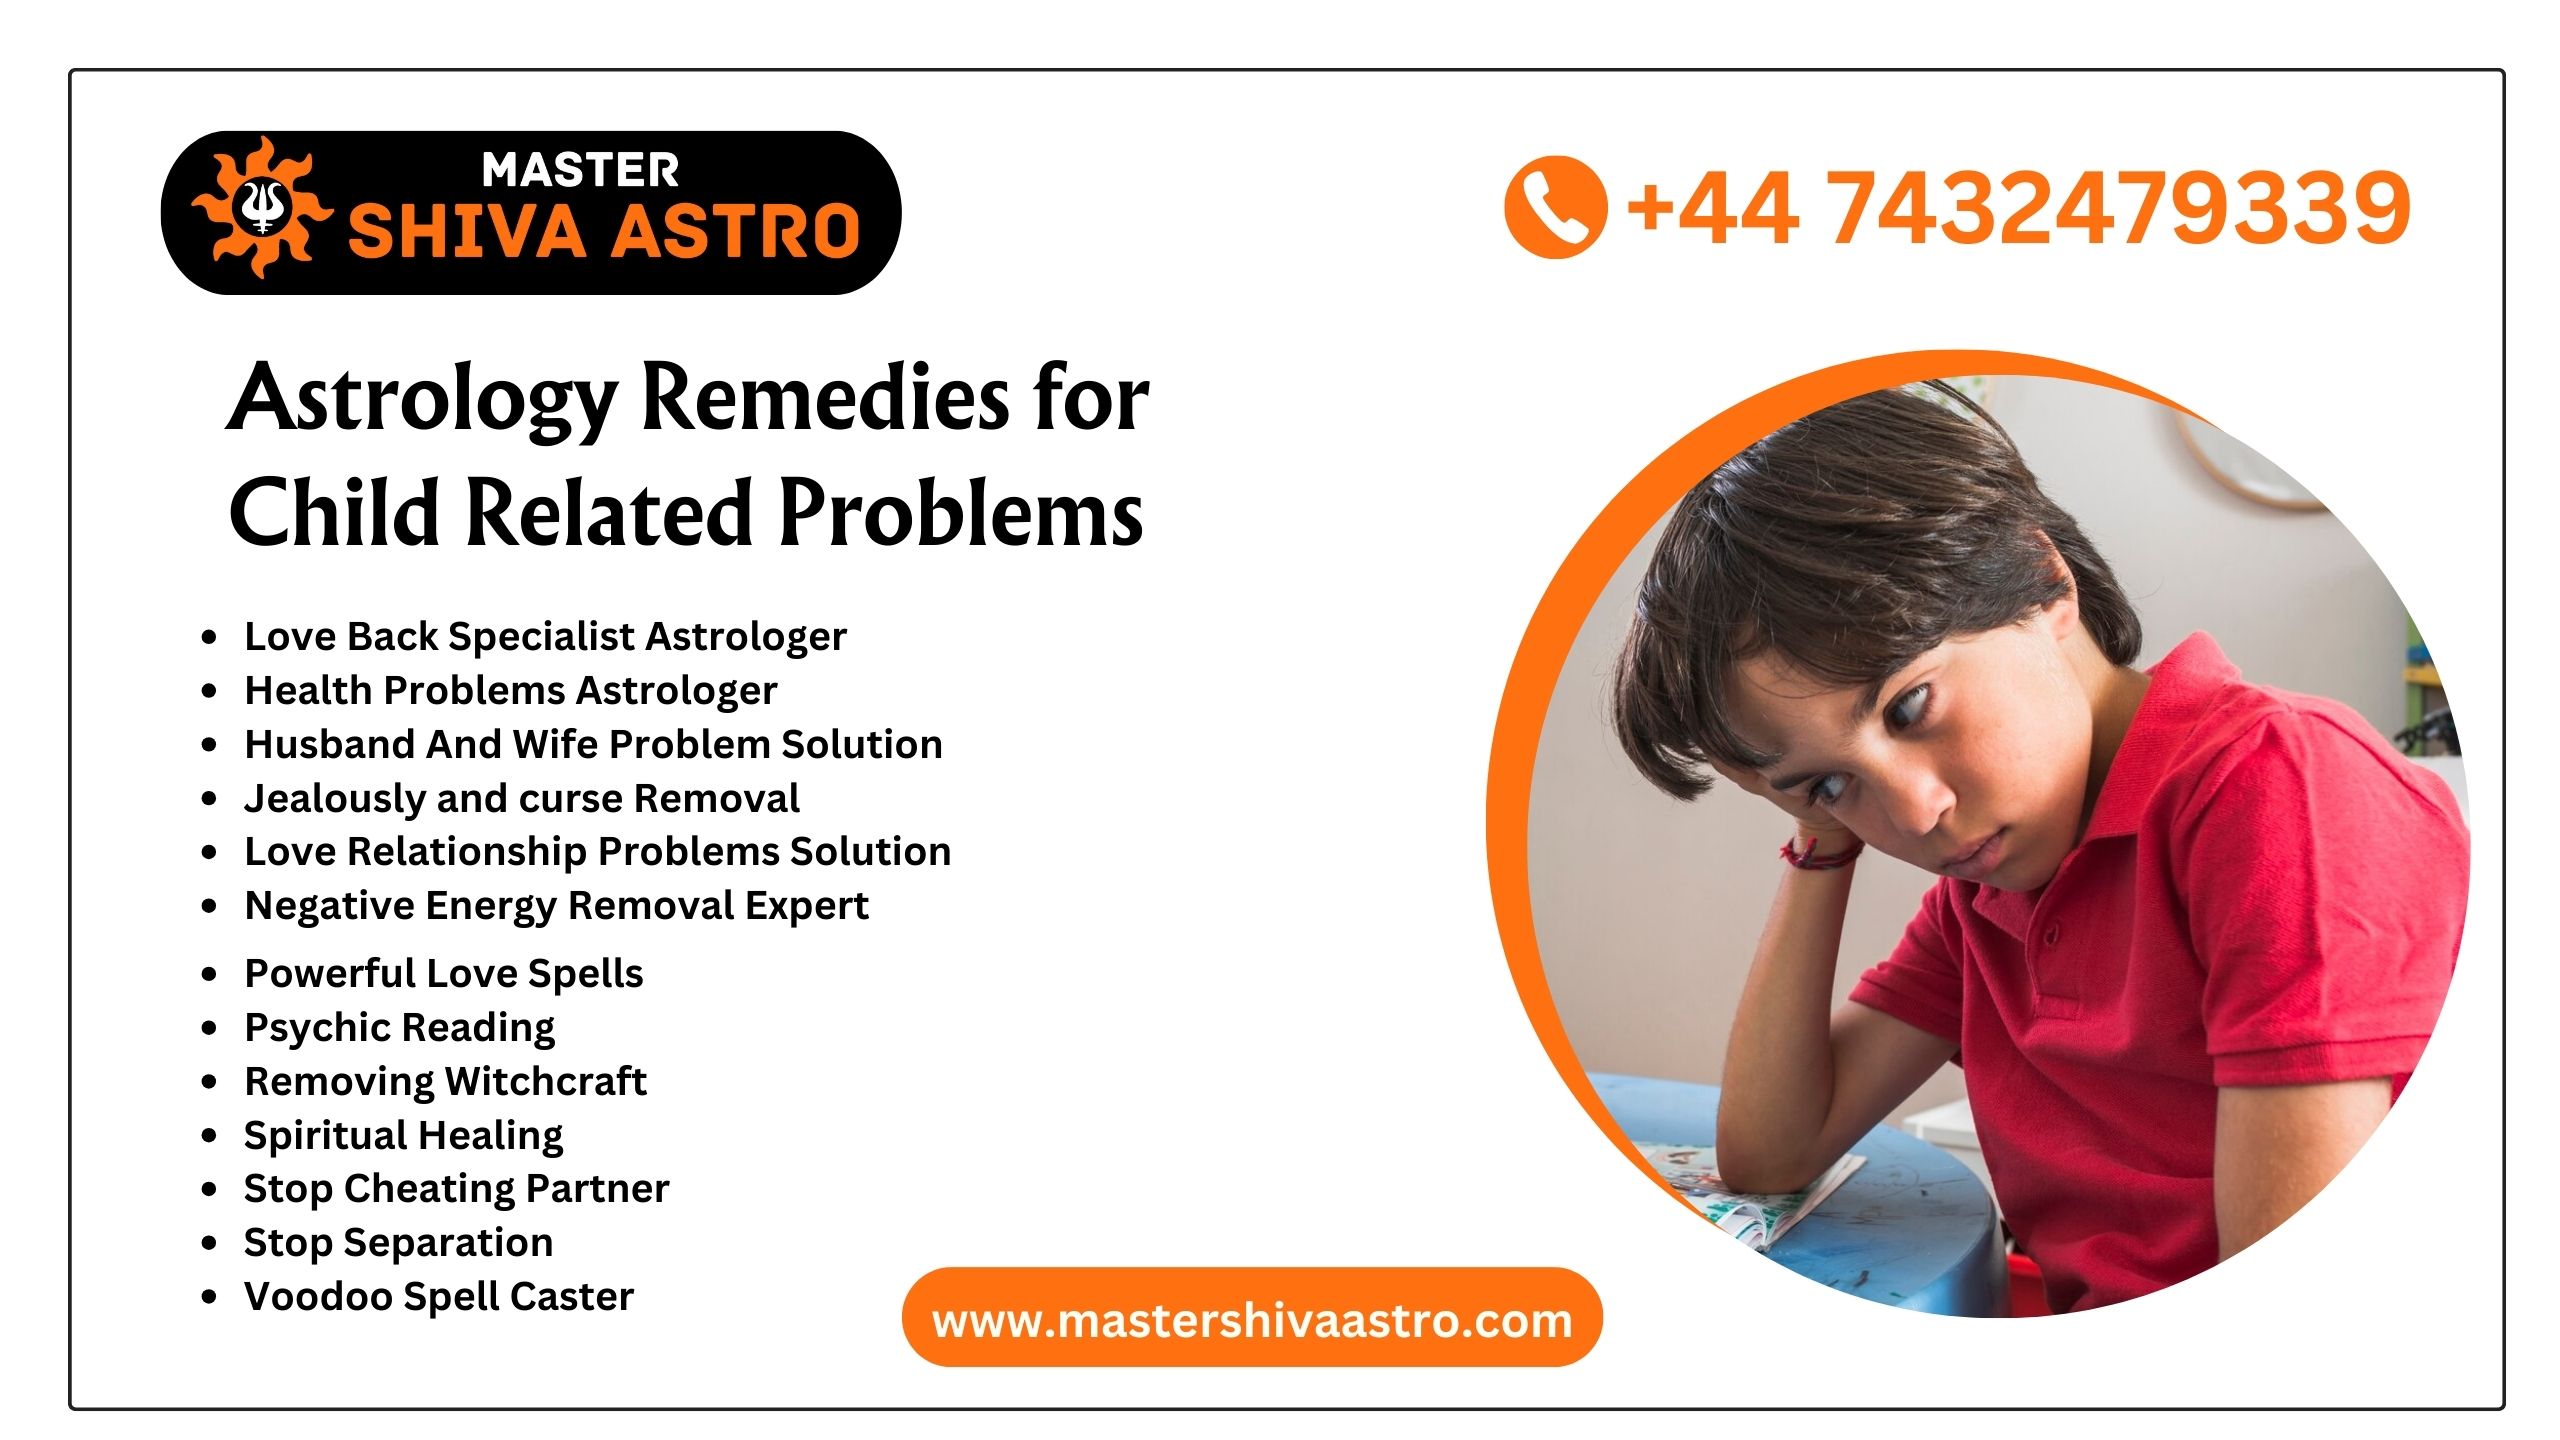 Astrology Remedies for Child Related Problems - Master Shiva